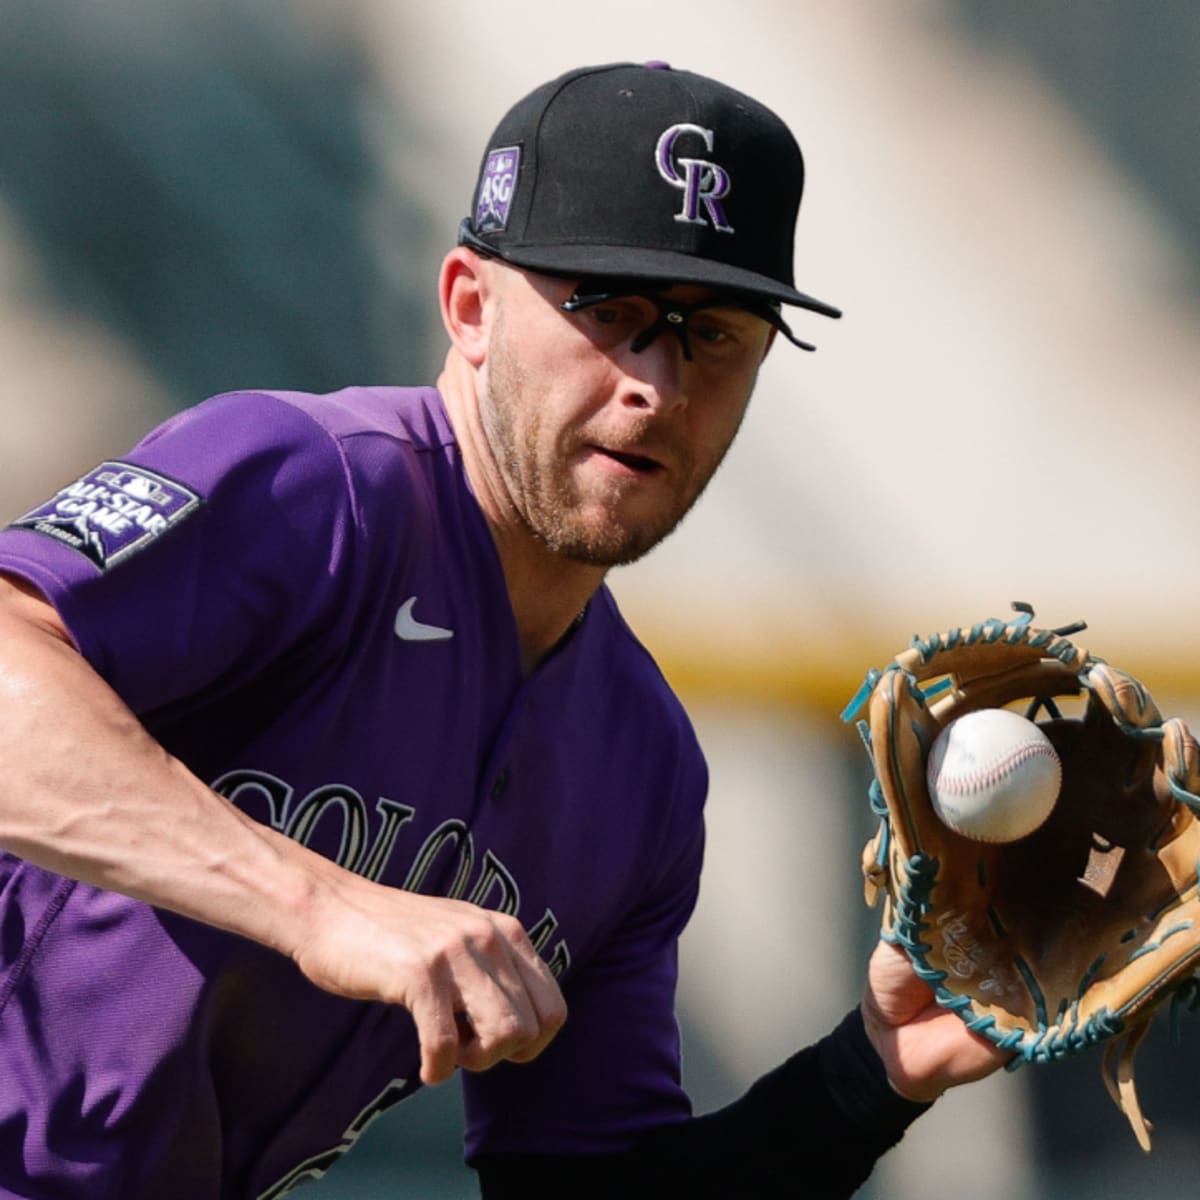 Trevor Story agrees to terms with Boston Red Sox in unorthodox deal